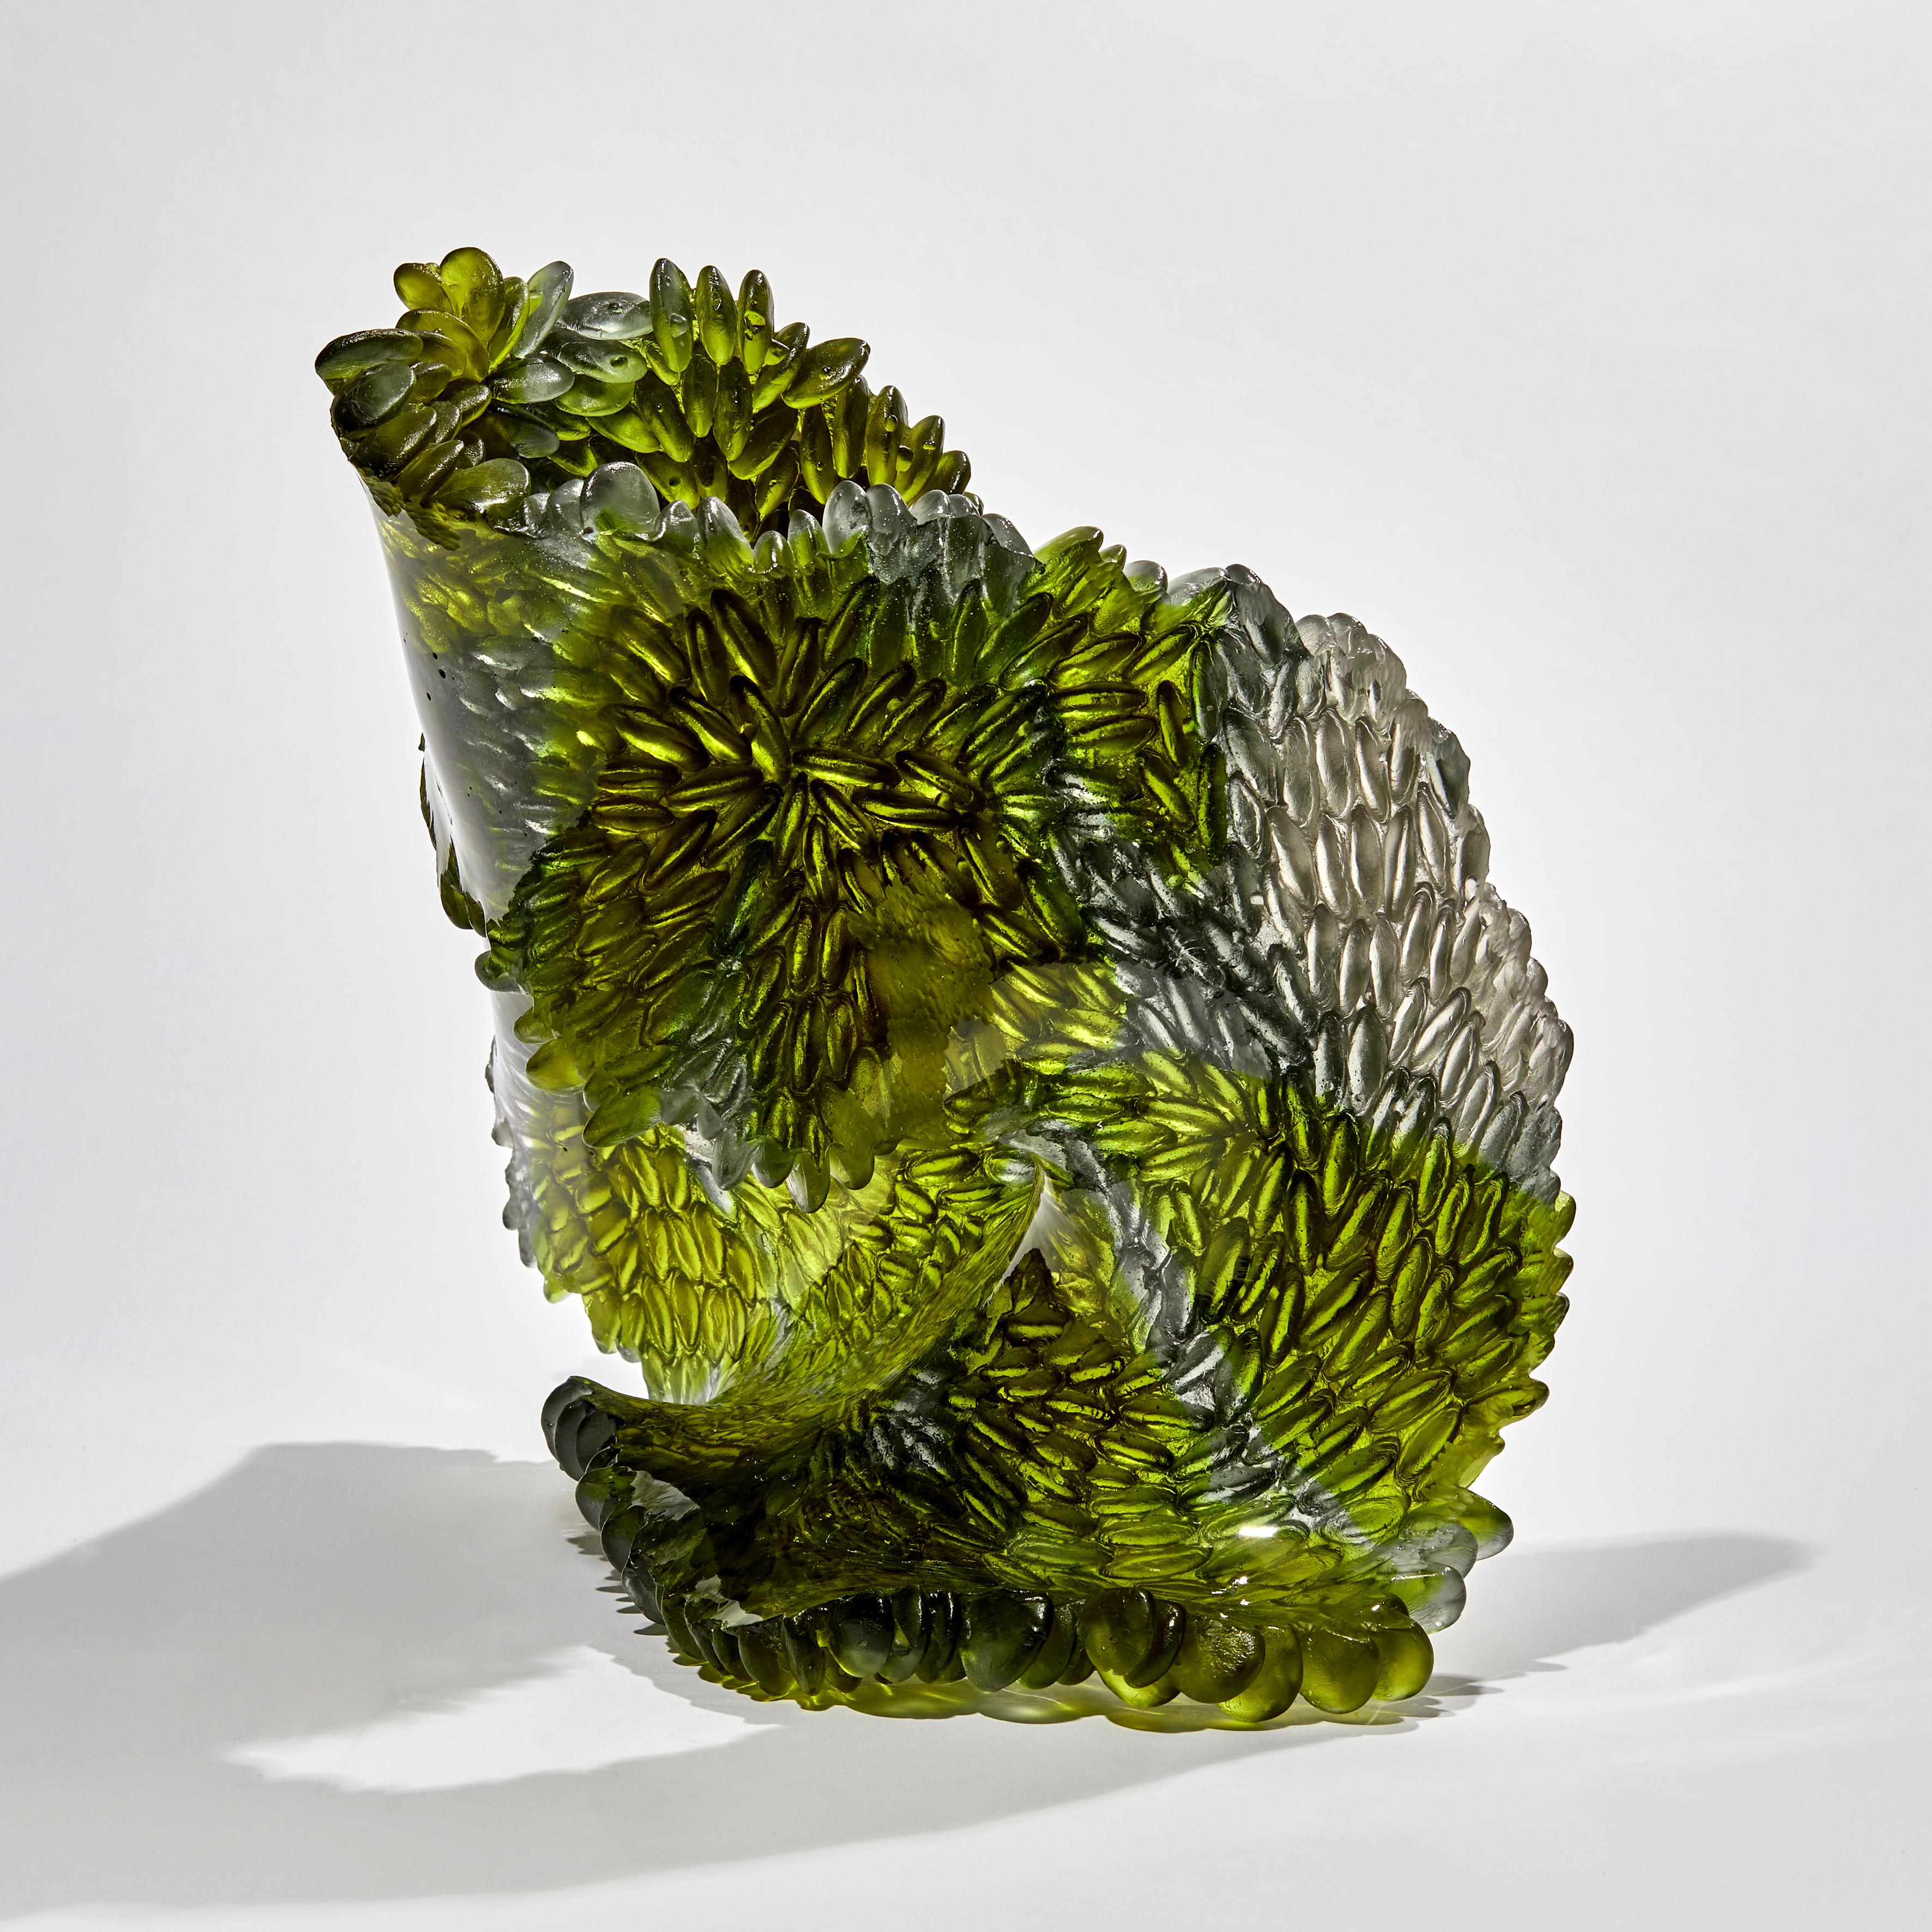 Organic Modern Green Oval, Unique Glass Sculpture in Olive Green & Grey by Nina Casson McGarva